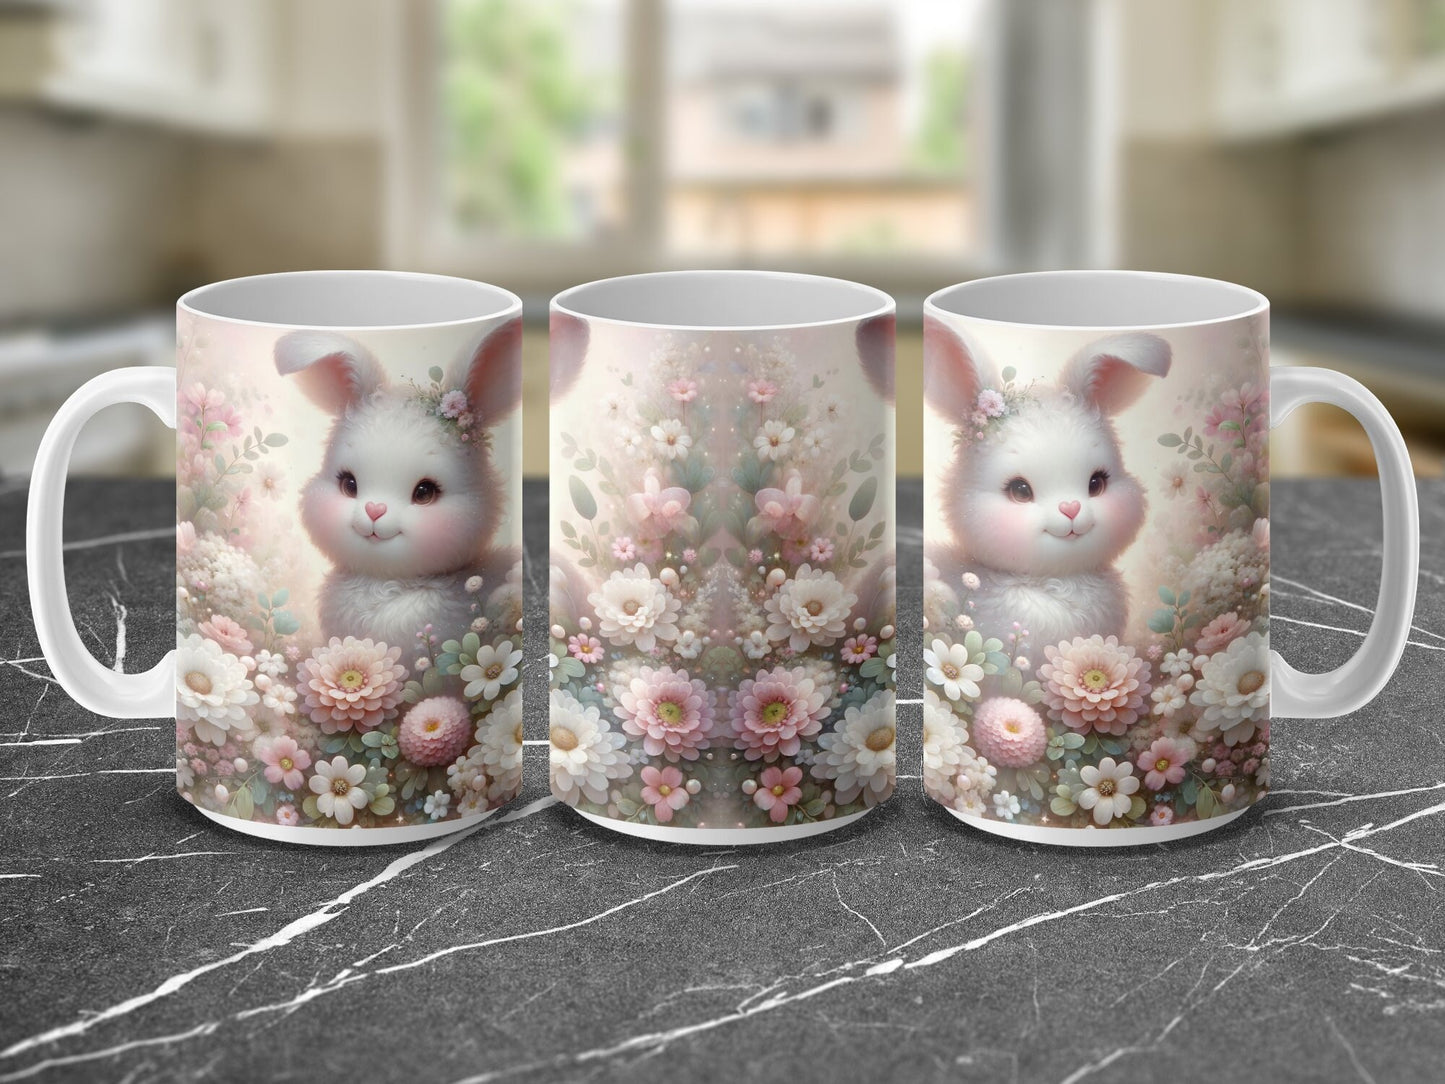 Adorable Bunny Mug, Whimsical Cute Rabbit Floral Coffee Cup, Perfect Springtime Gift, Soft Pastel Colors, Unique Gift for Easter Celebration